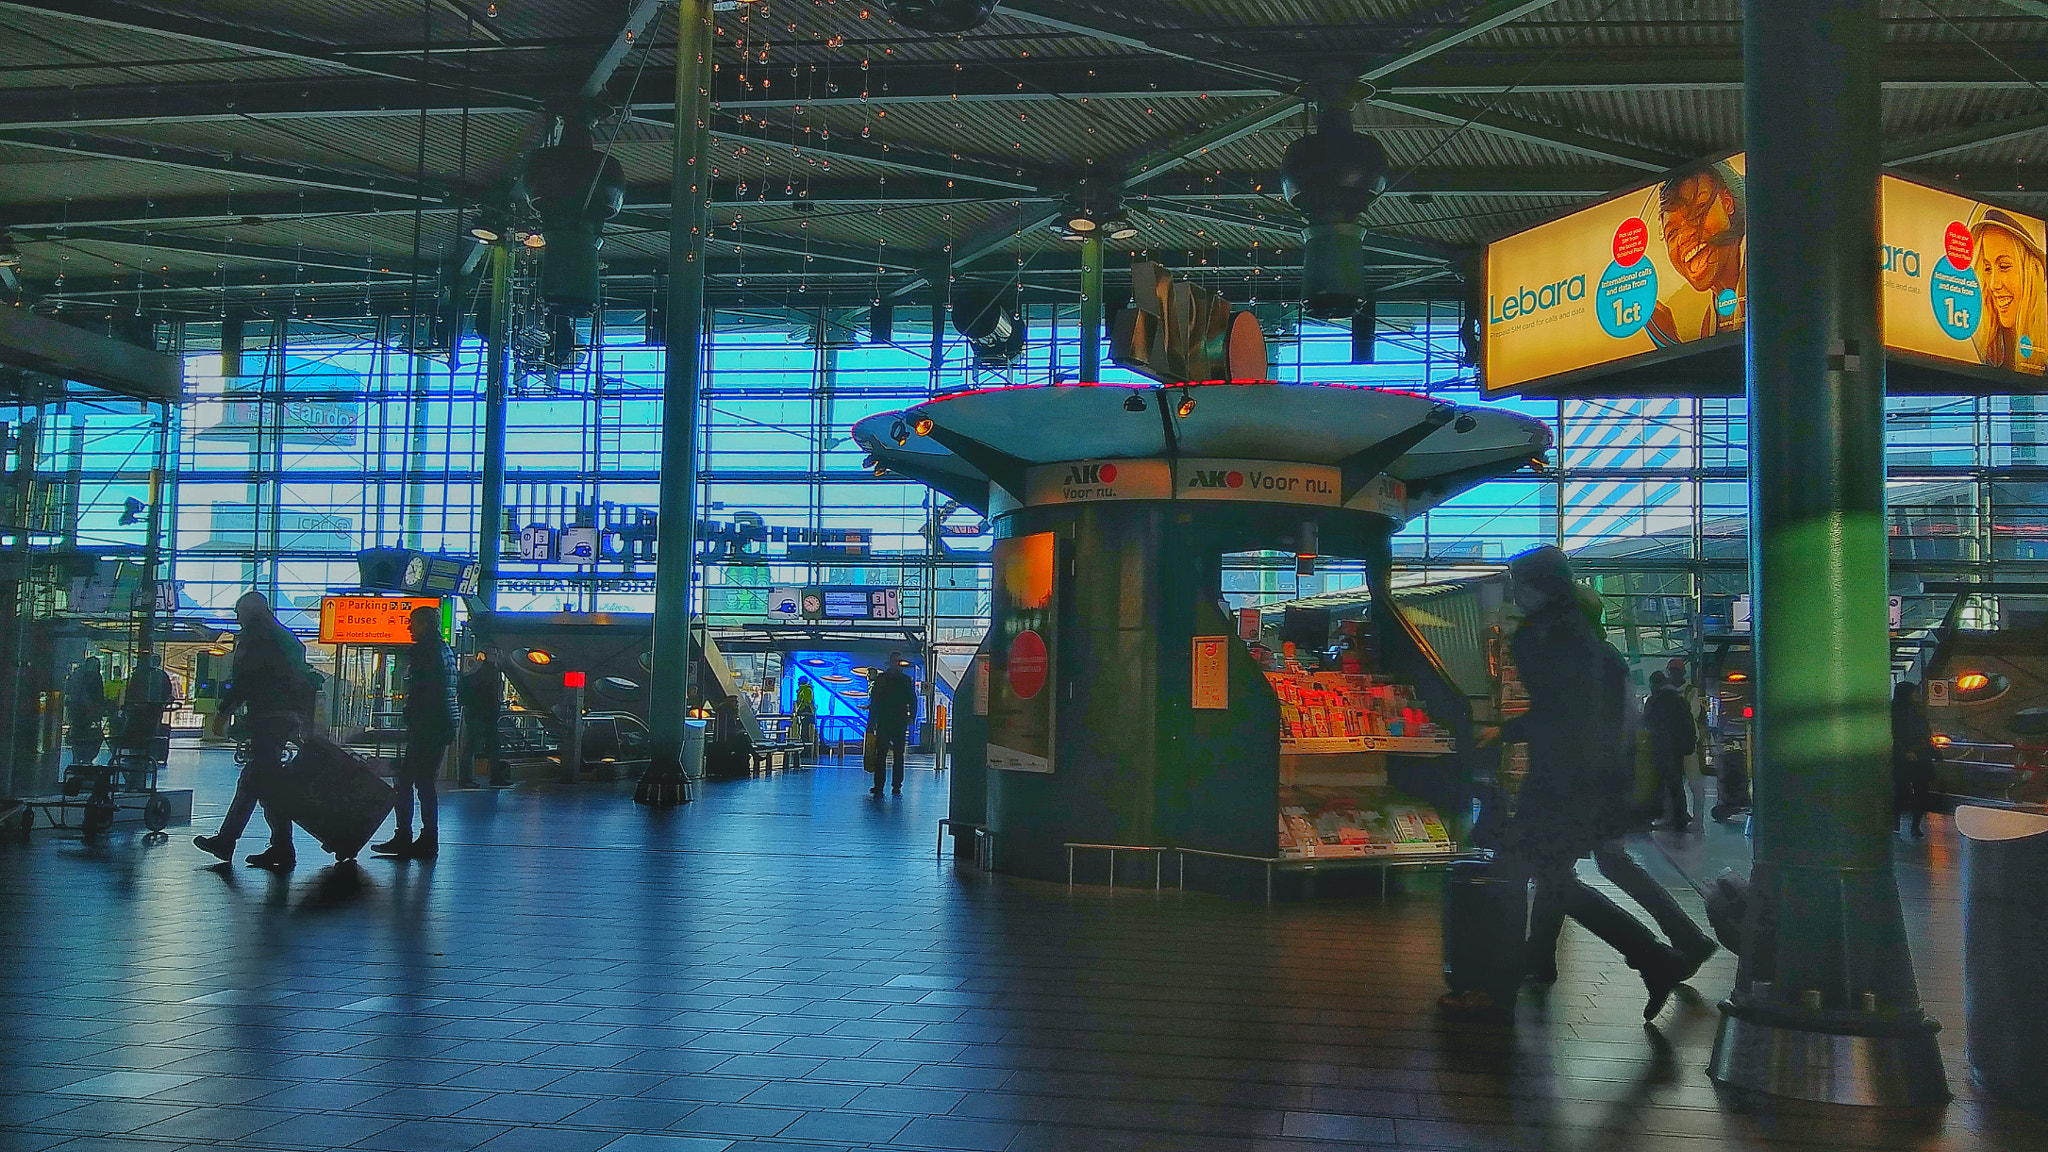 LG K535 sample photo. Schiphol airport photography